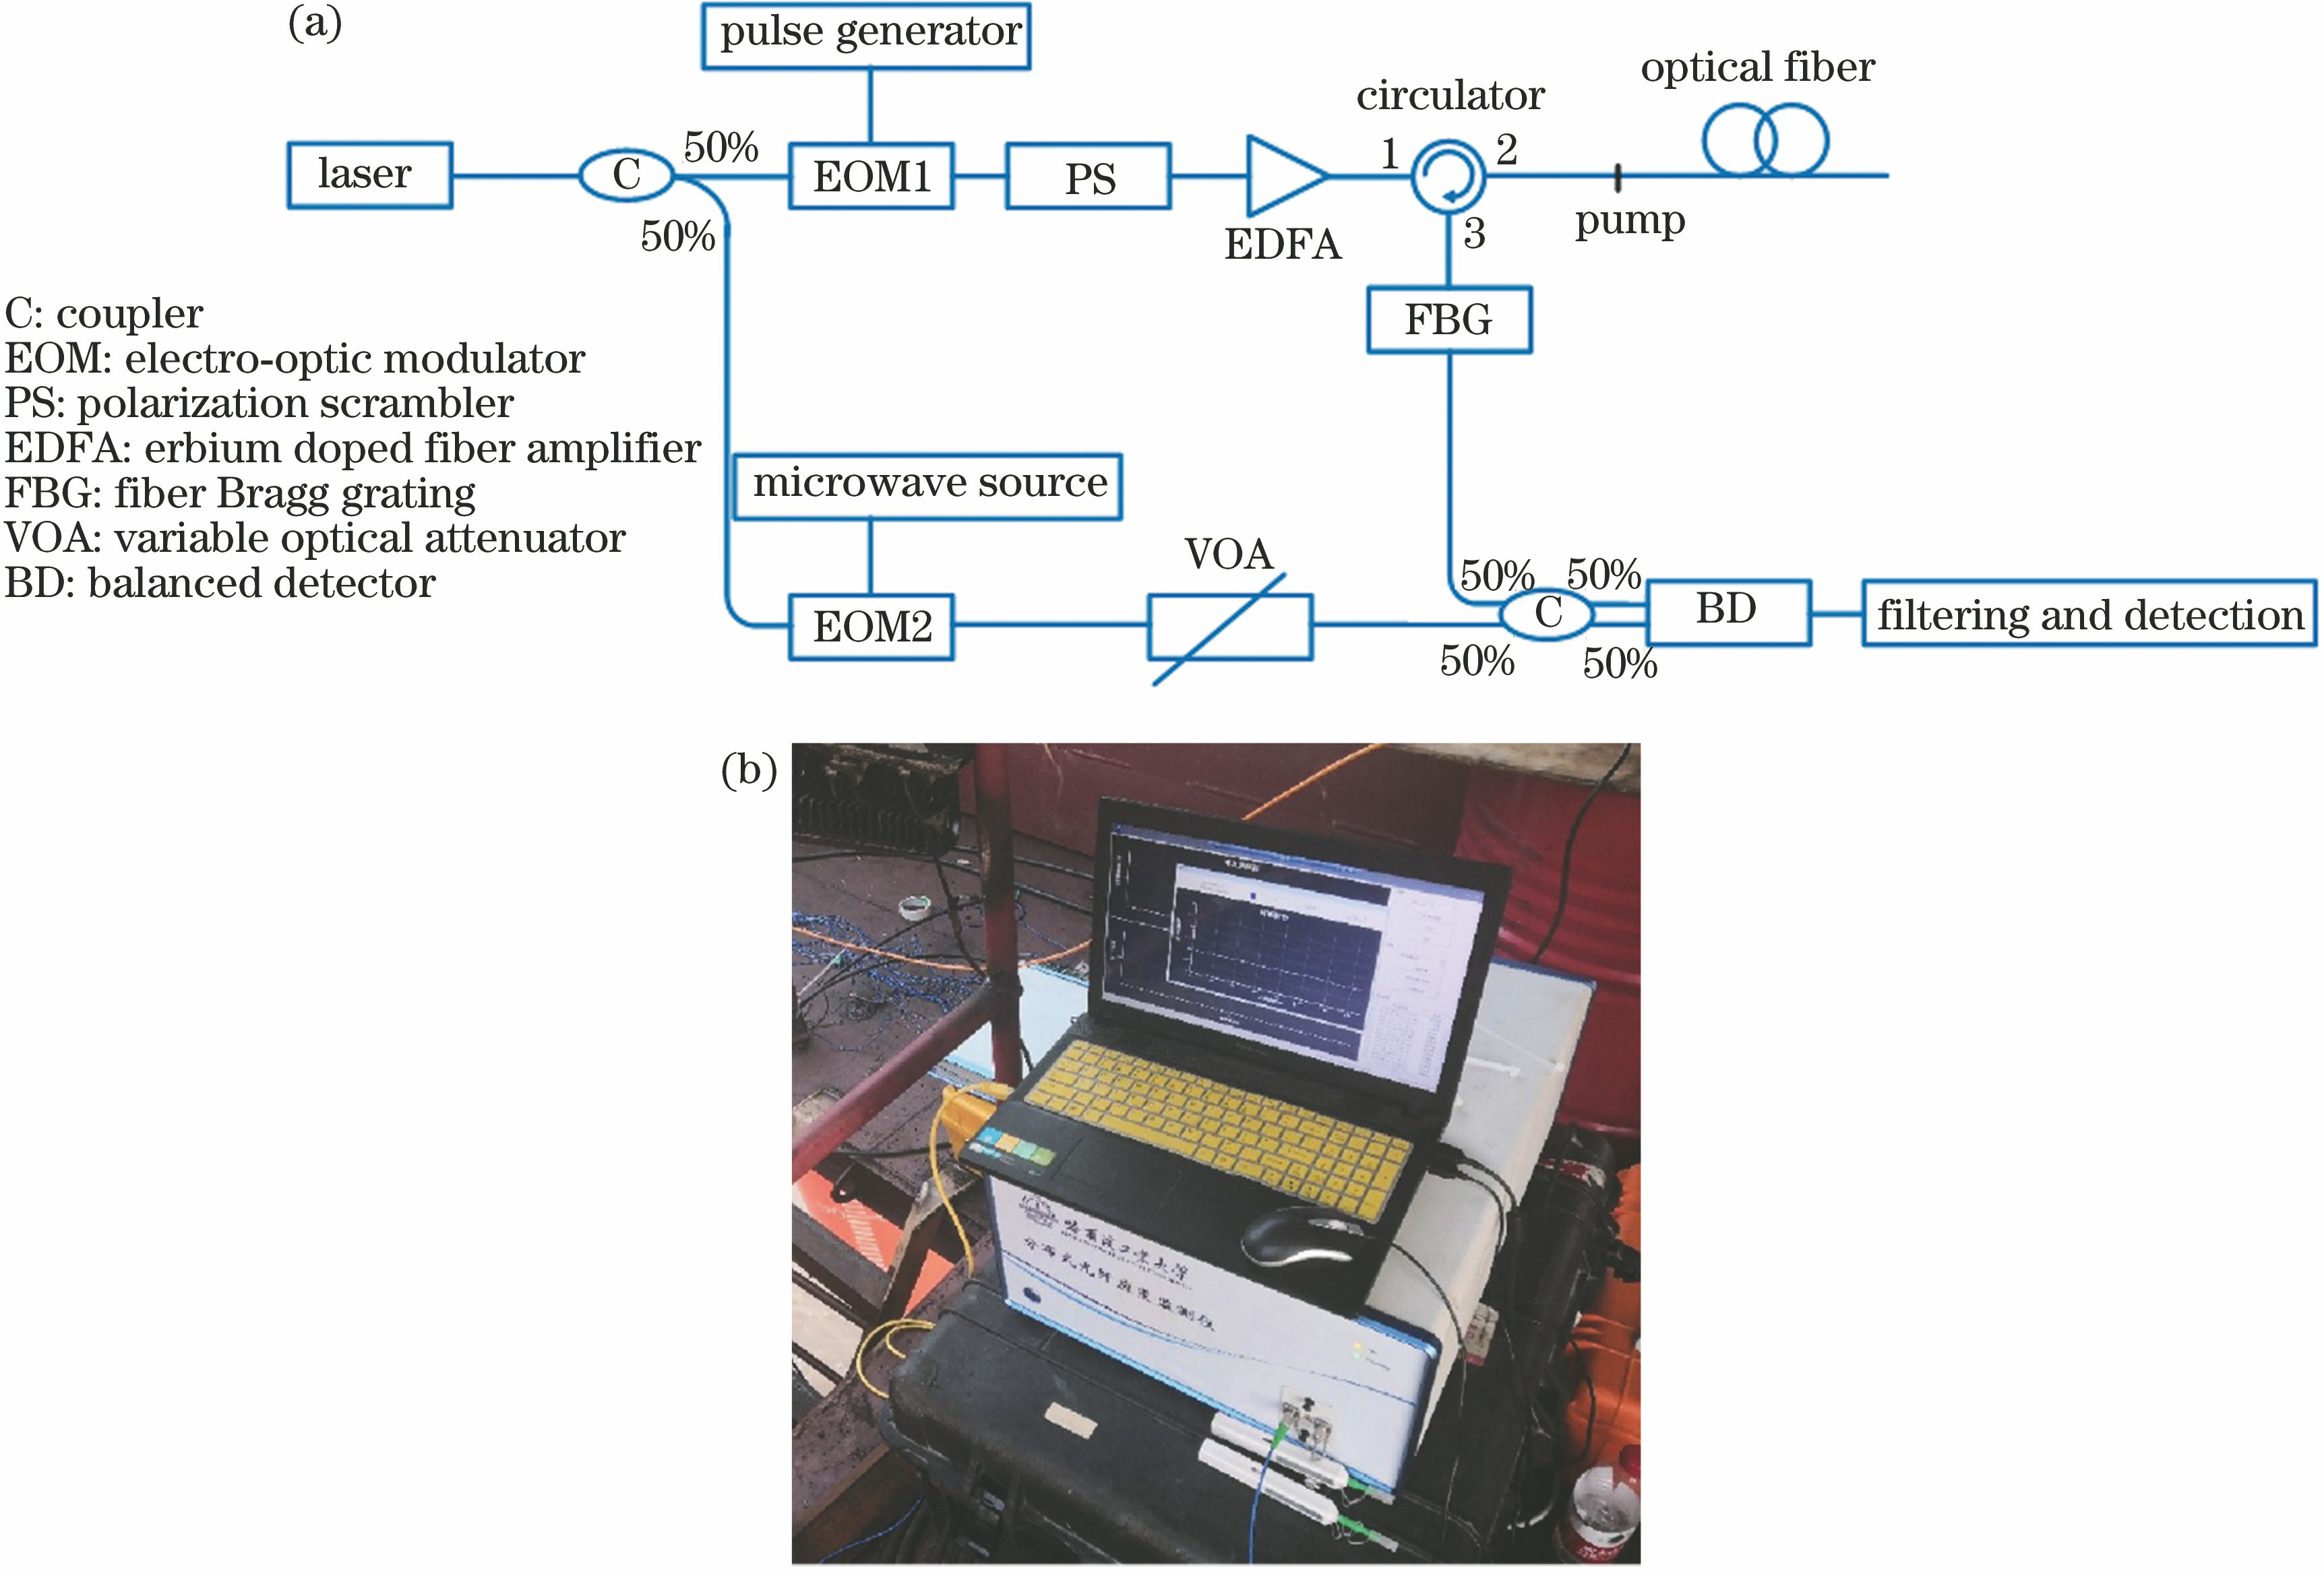 Test system of BOTDR. (a) Experimental setup of BOTDR; (b) photo of the test system